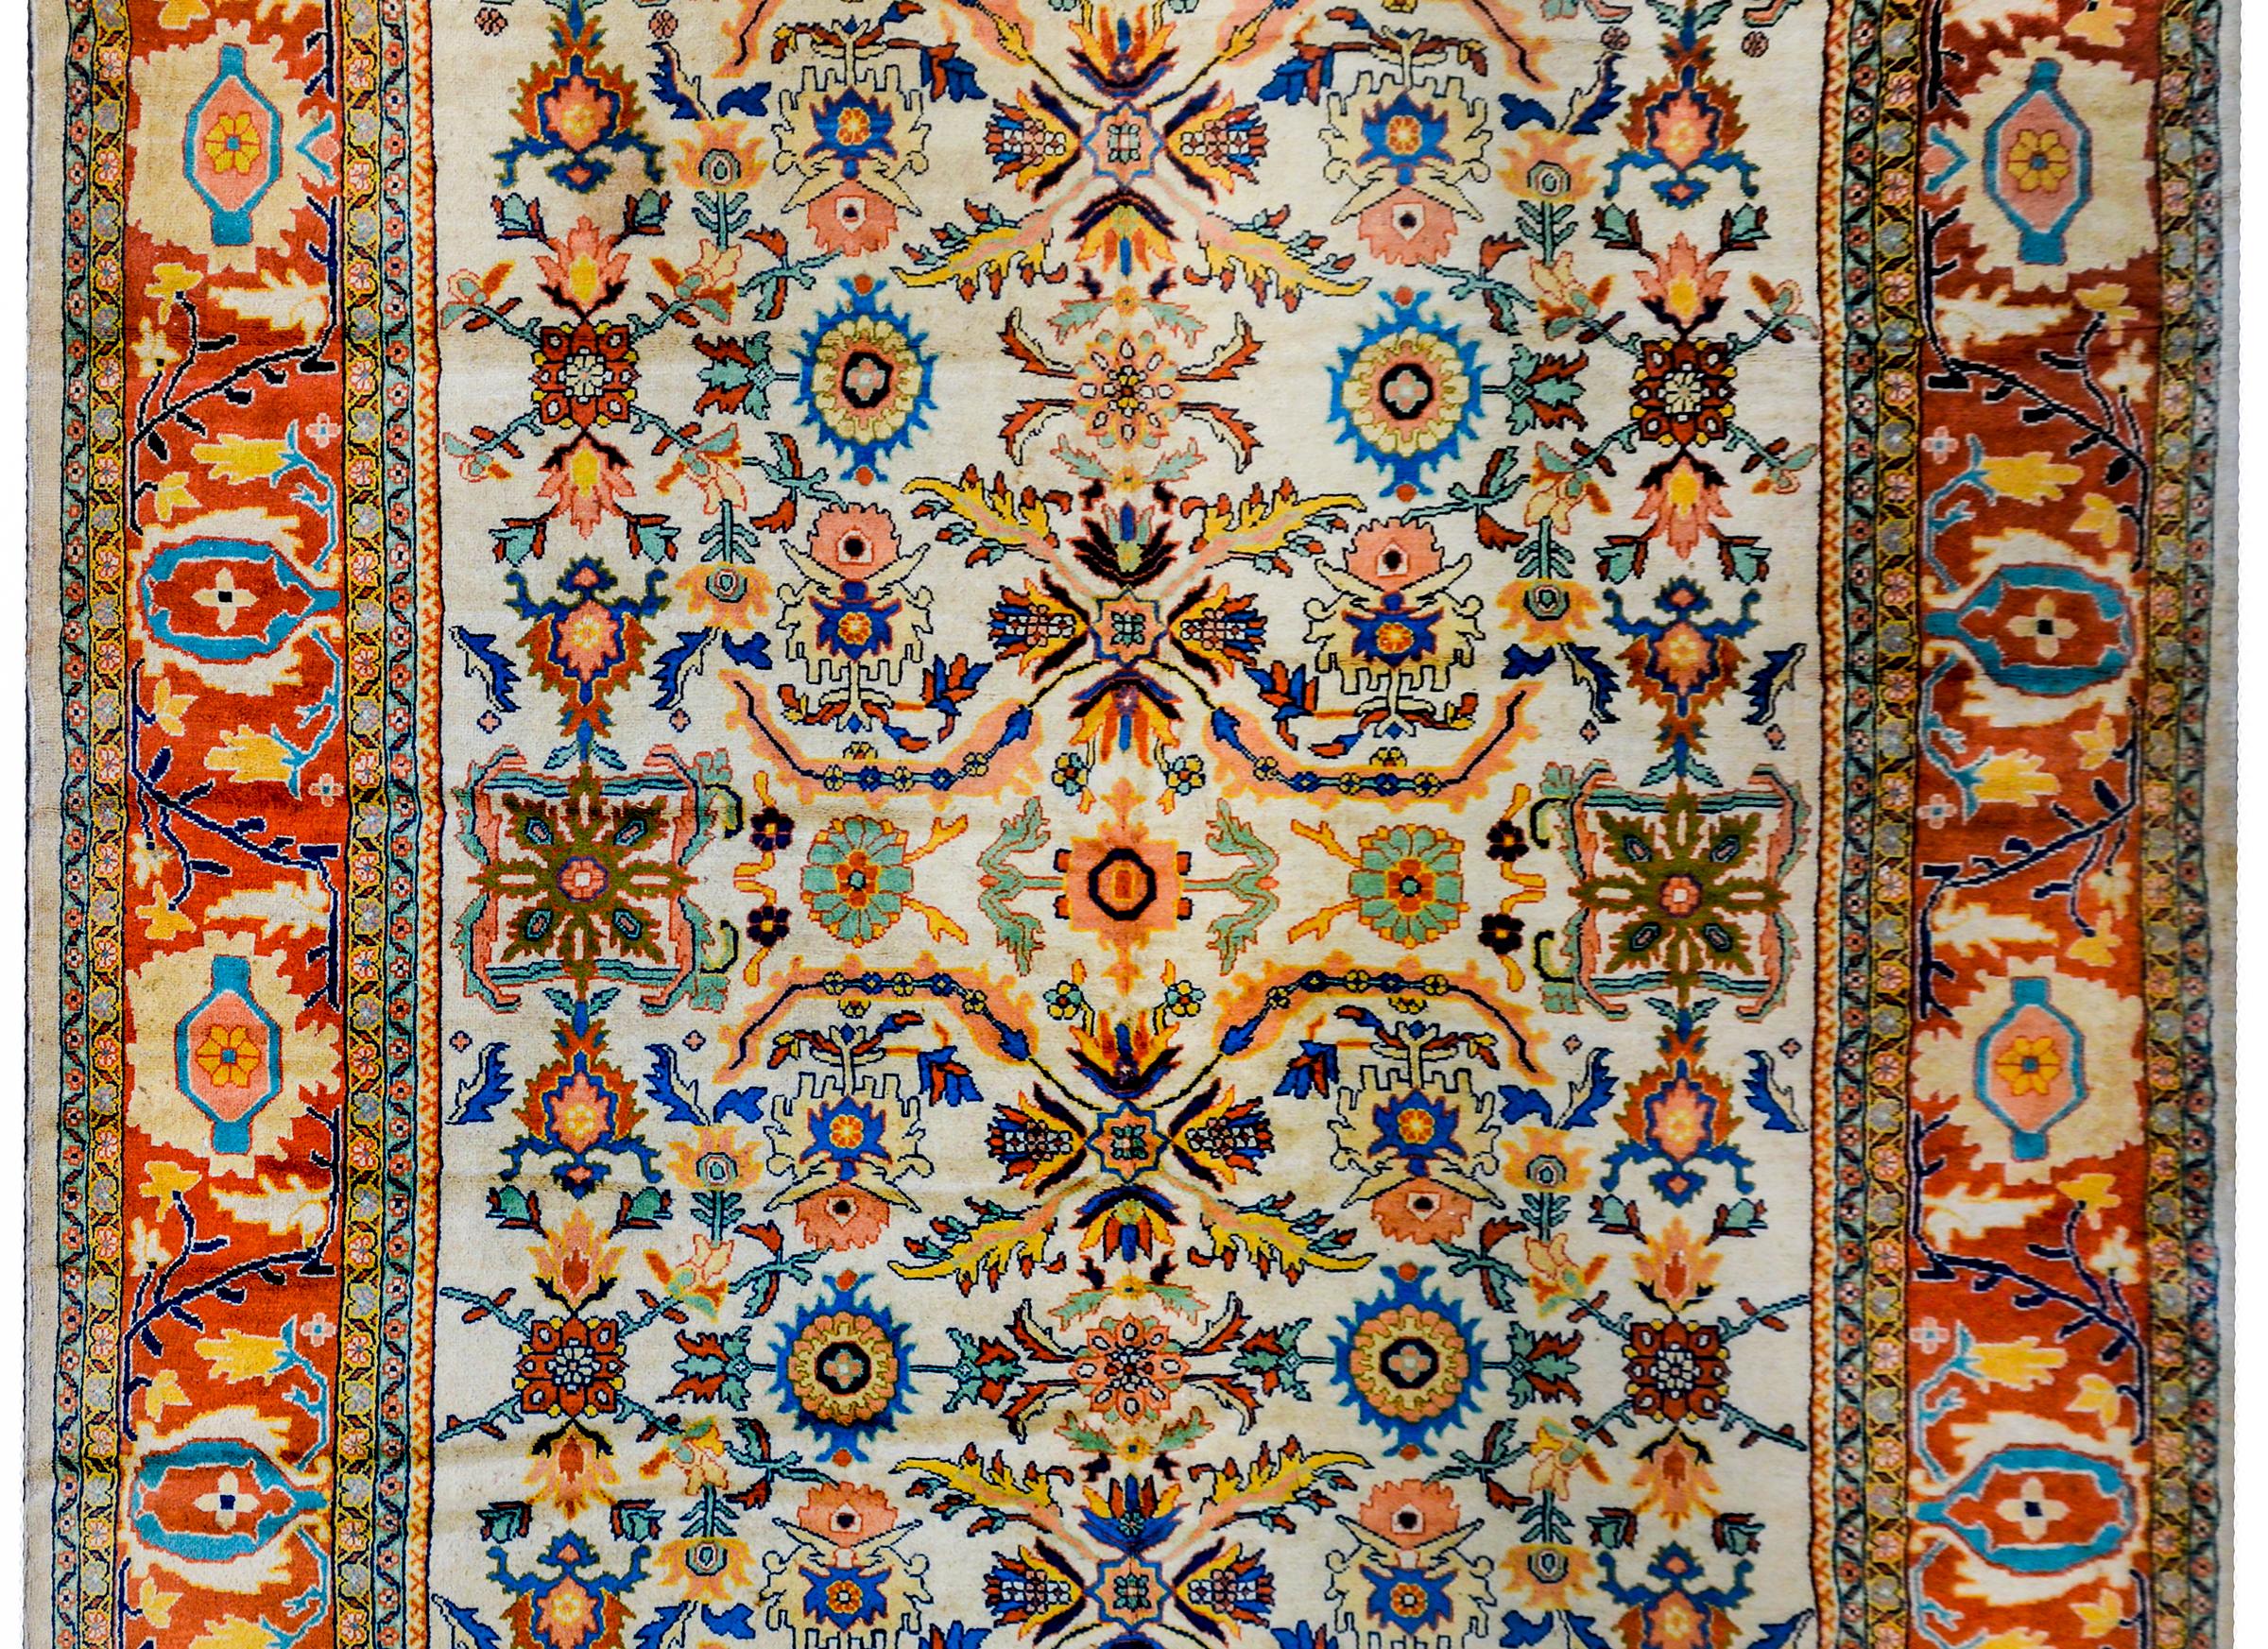 A breathtaking mid-20th century Persian Sultanabad rug with a large-scale mirrored floral patterned field woven in crimson, gold, green, pink, and indigo on a cream colored background, surrounded by a wide large-scale floral and scrolling vine